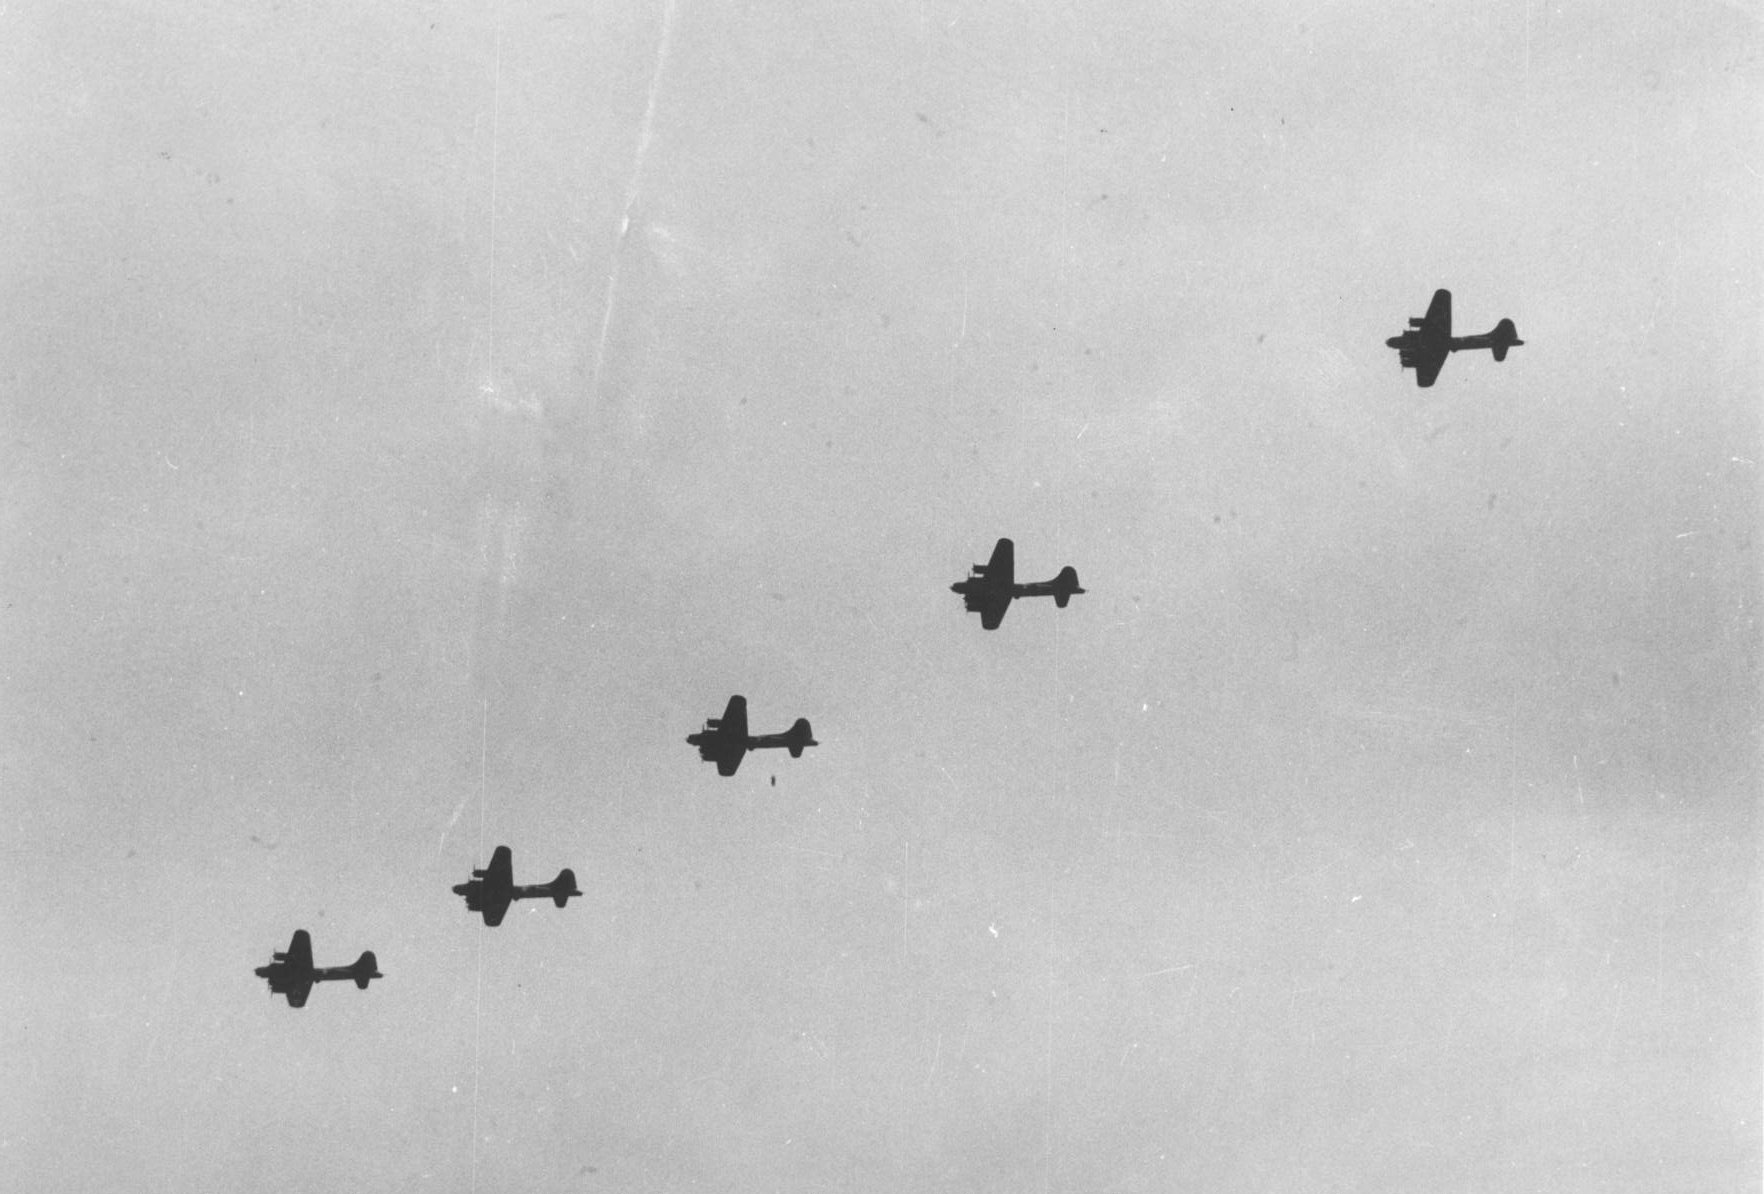 Six B-17E bombers, the entire heavy bombing strength of the US 5th Air Force at the time, took off for a raid on Rabaul, New Britain, Solomon Islands, 1942